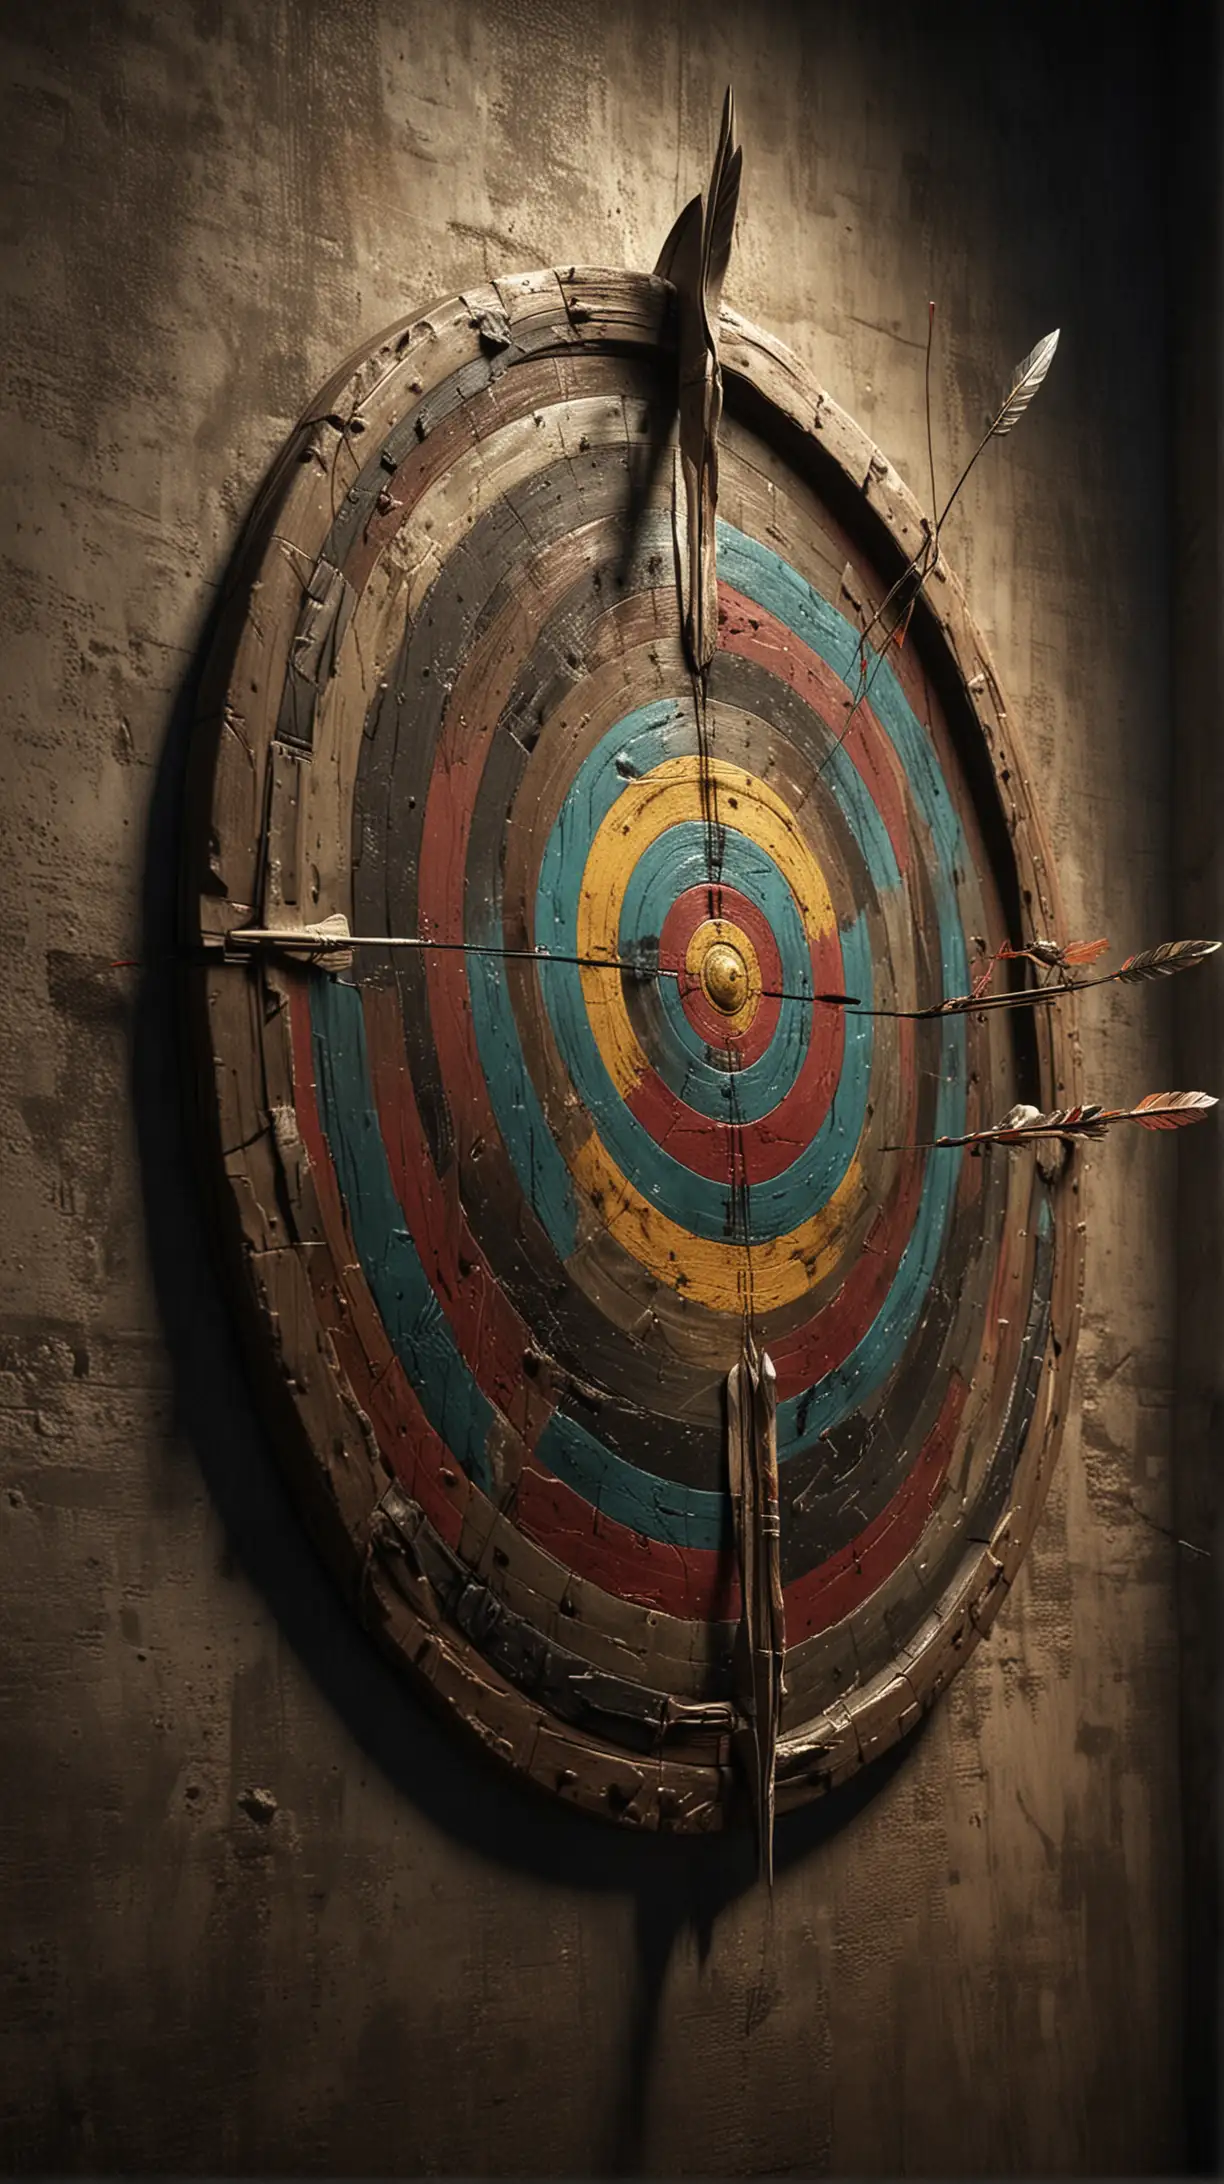 Successful Archer Ancient Arrow Hits Target in NoirInspired Atmosphere